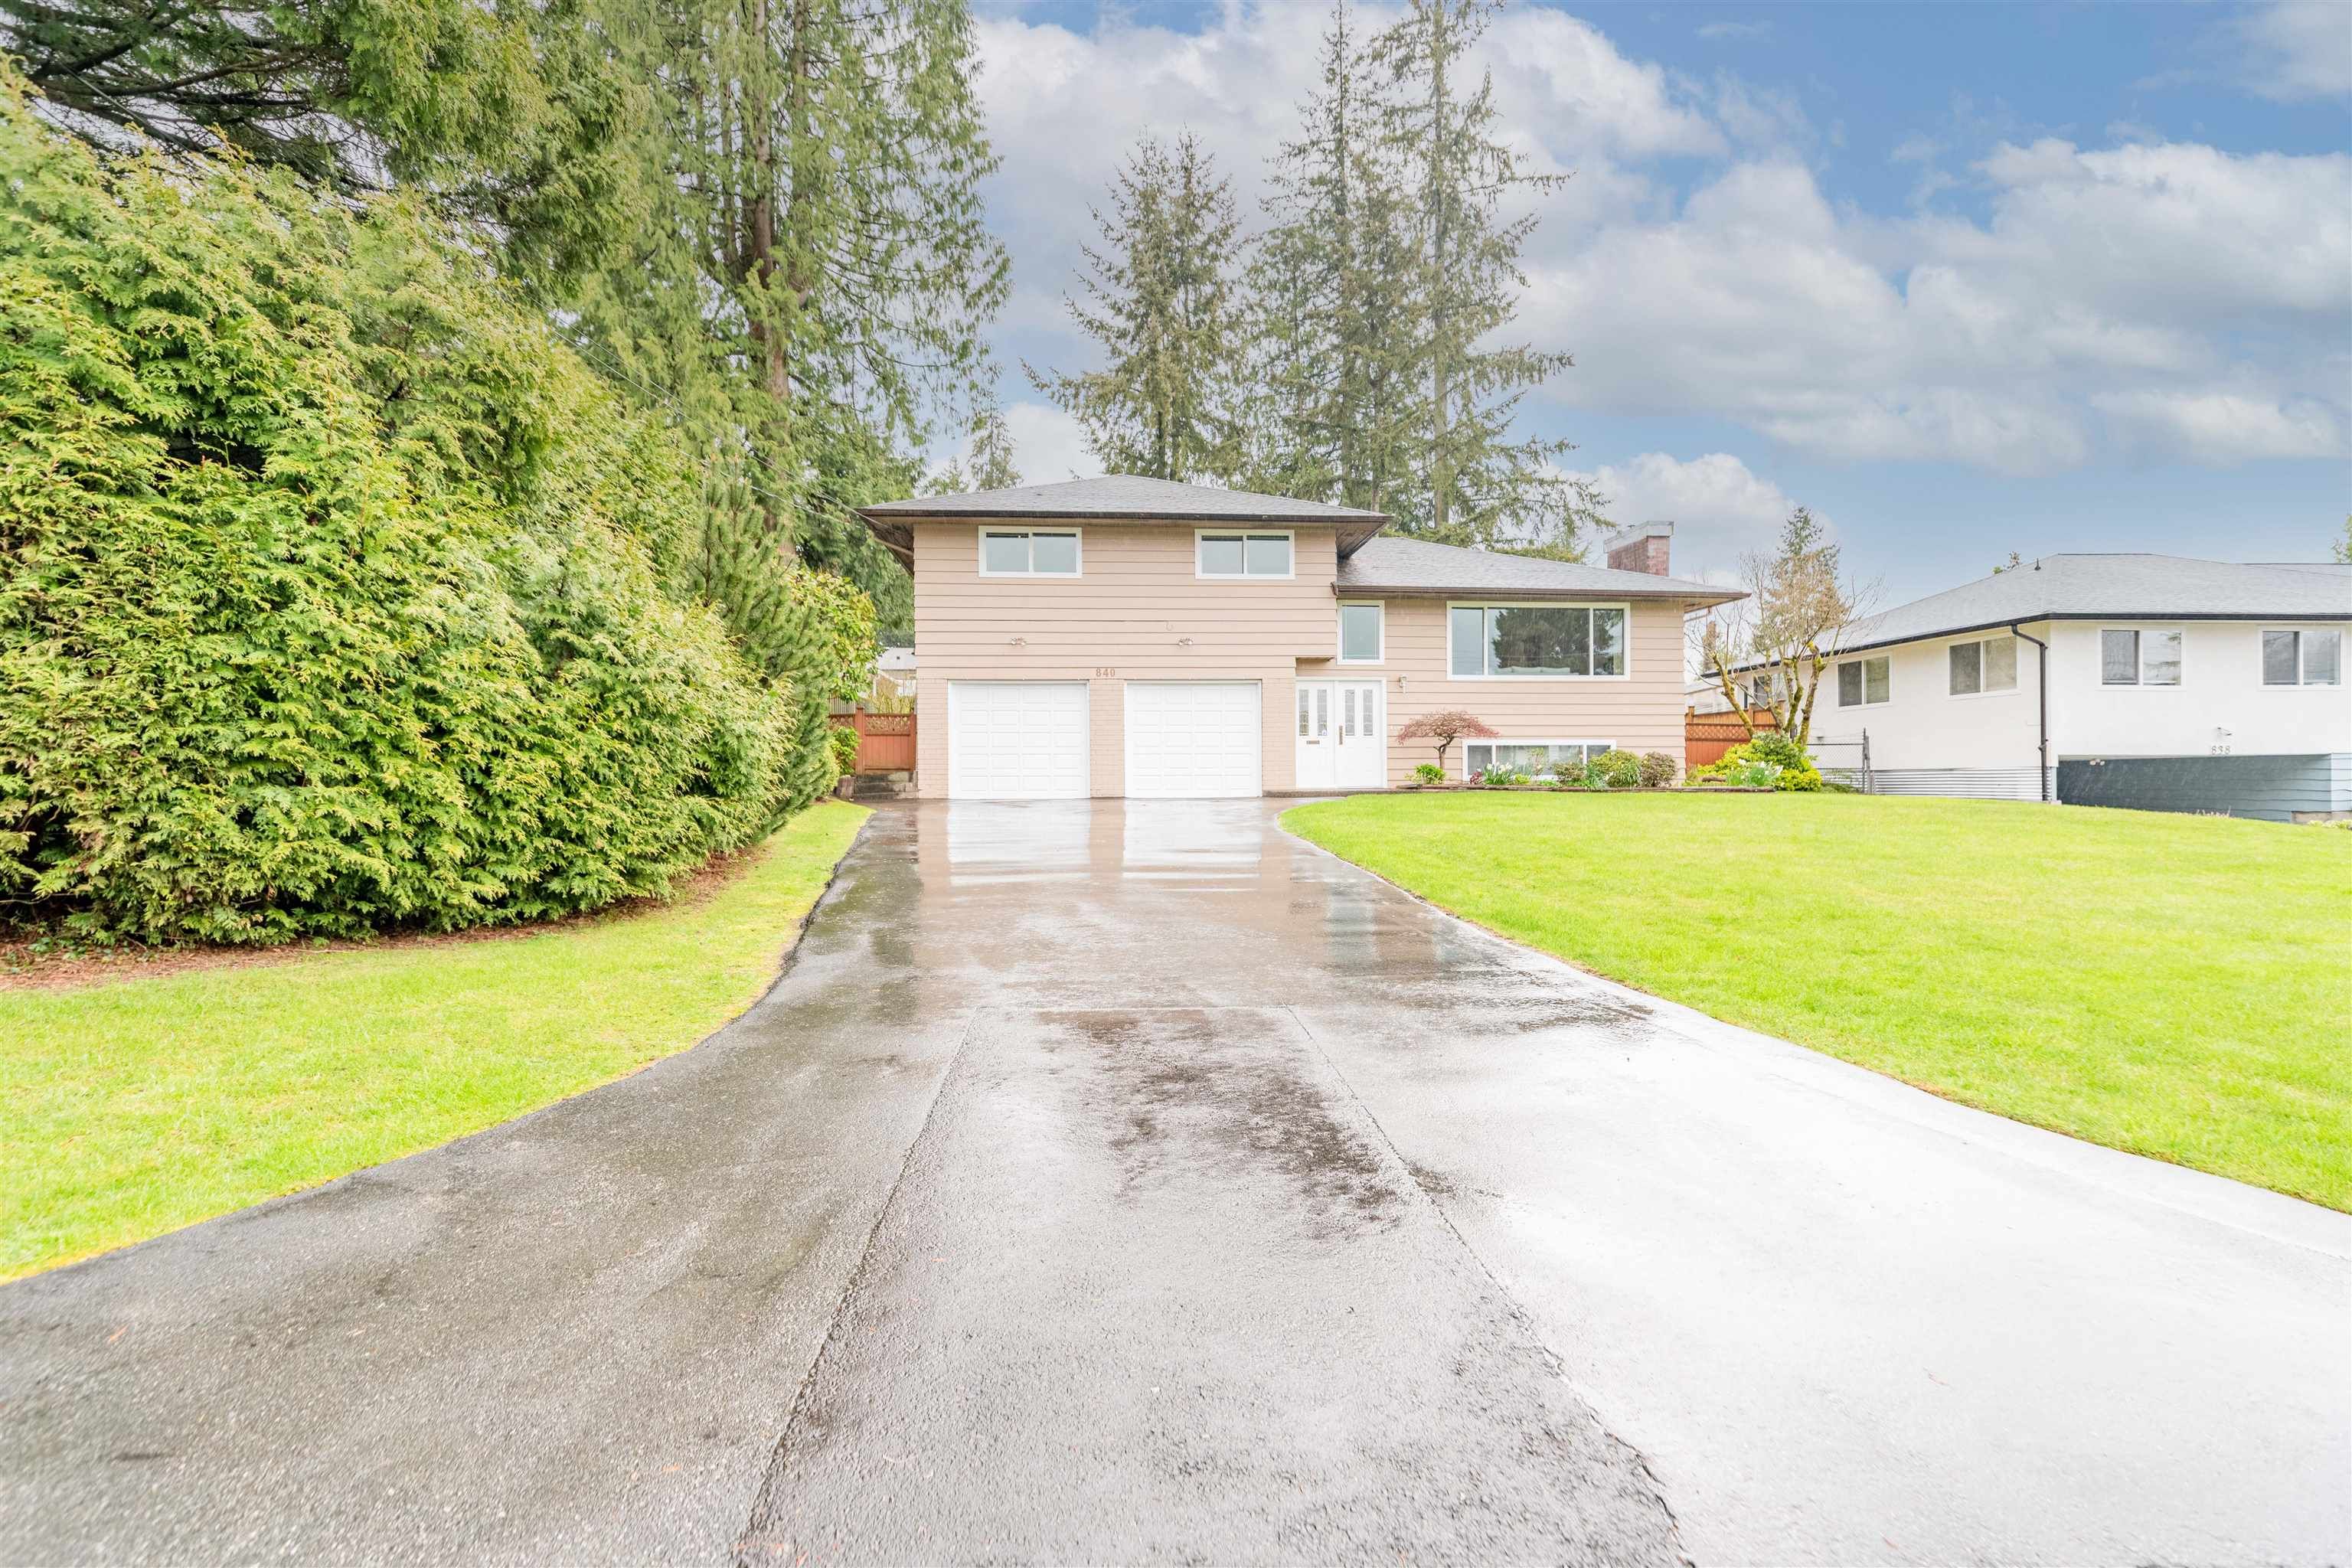 I have sold a property at 840 REGAN AVE in Coquitlam